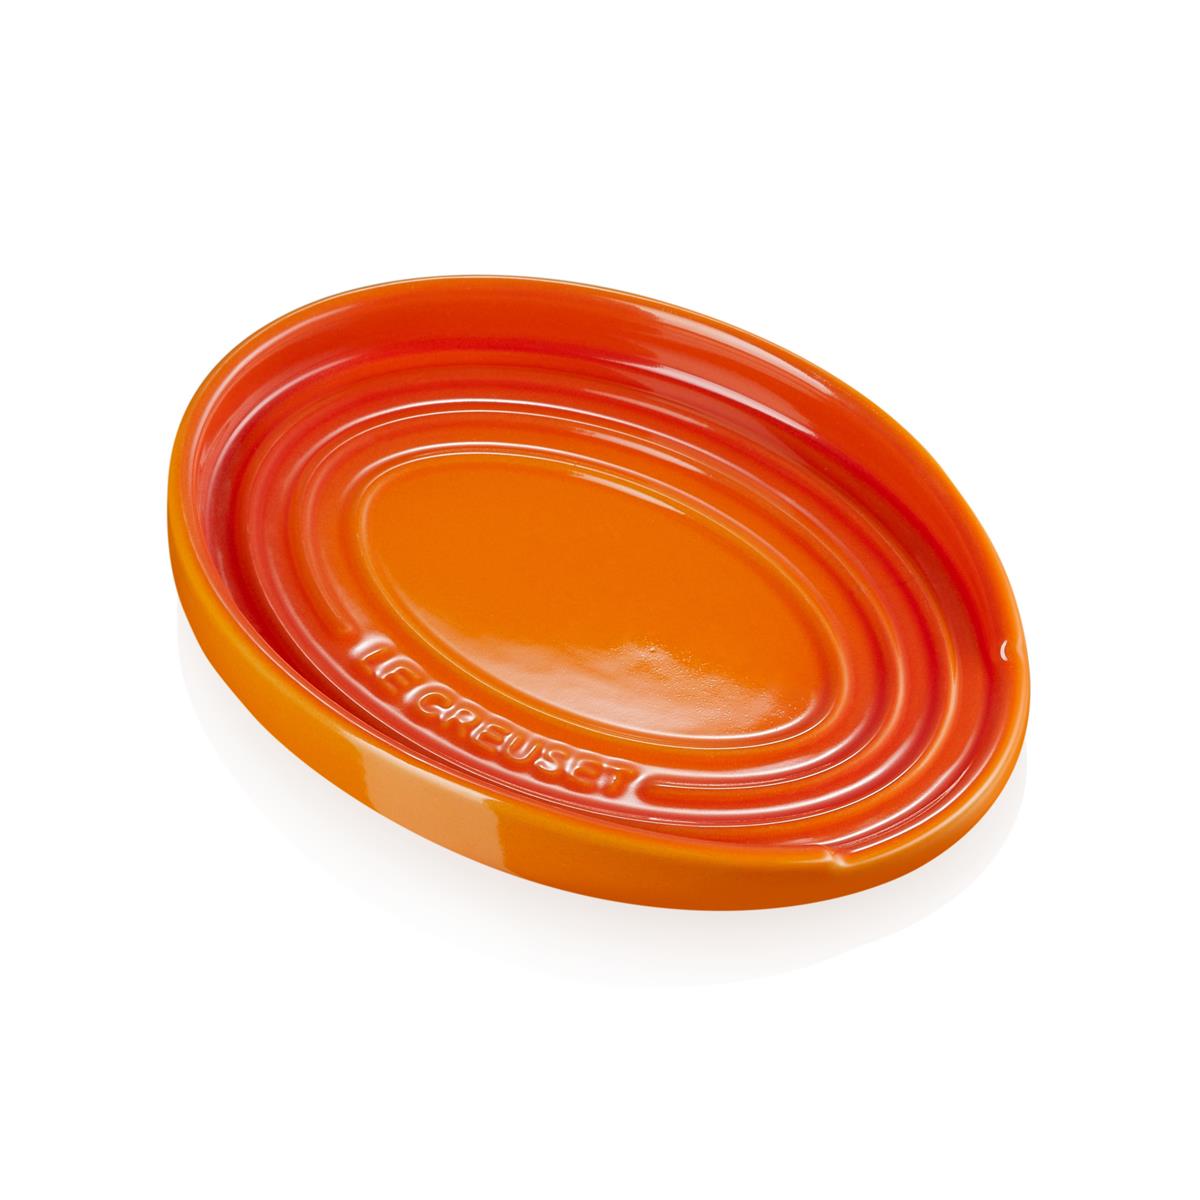 How is the le creuset spoon rest utilized with the Le Creuset Stoneware Oval Spoon Rest?